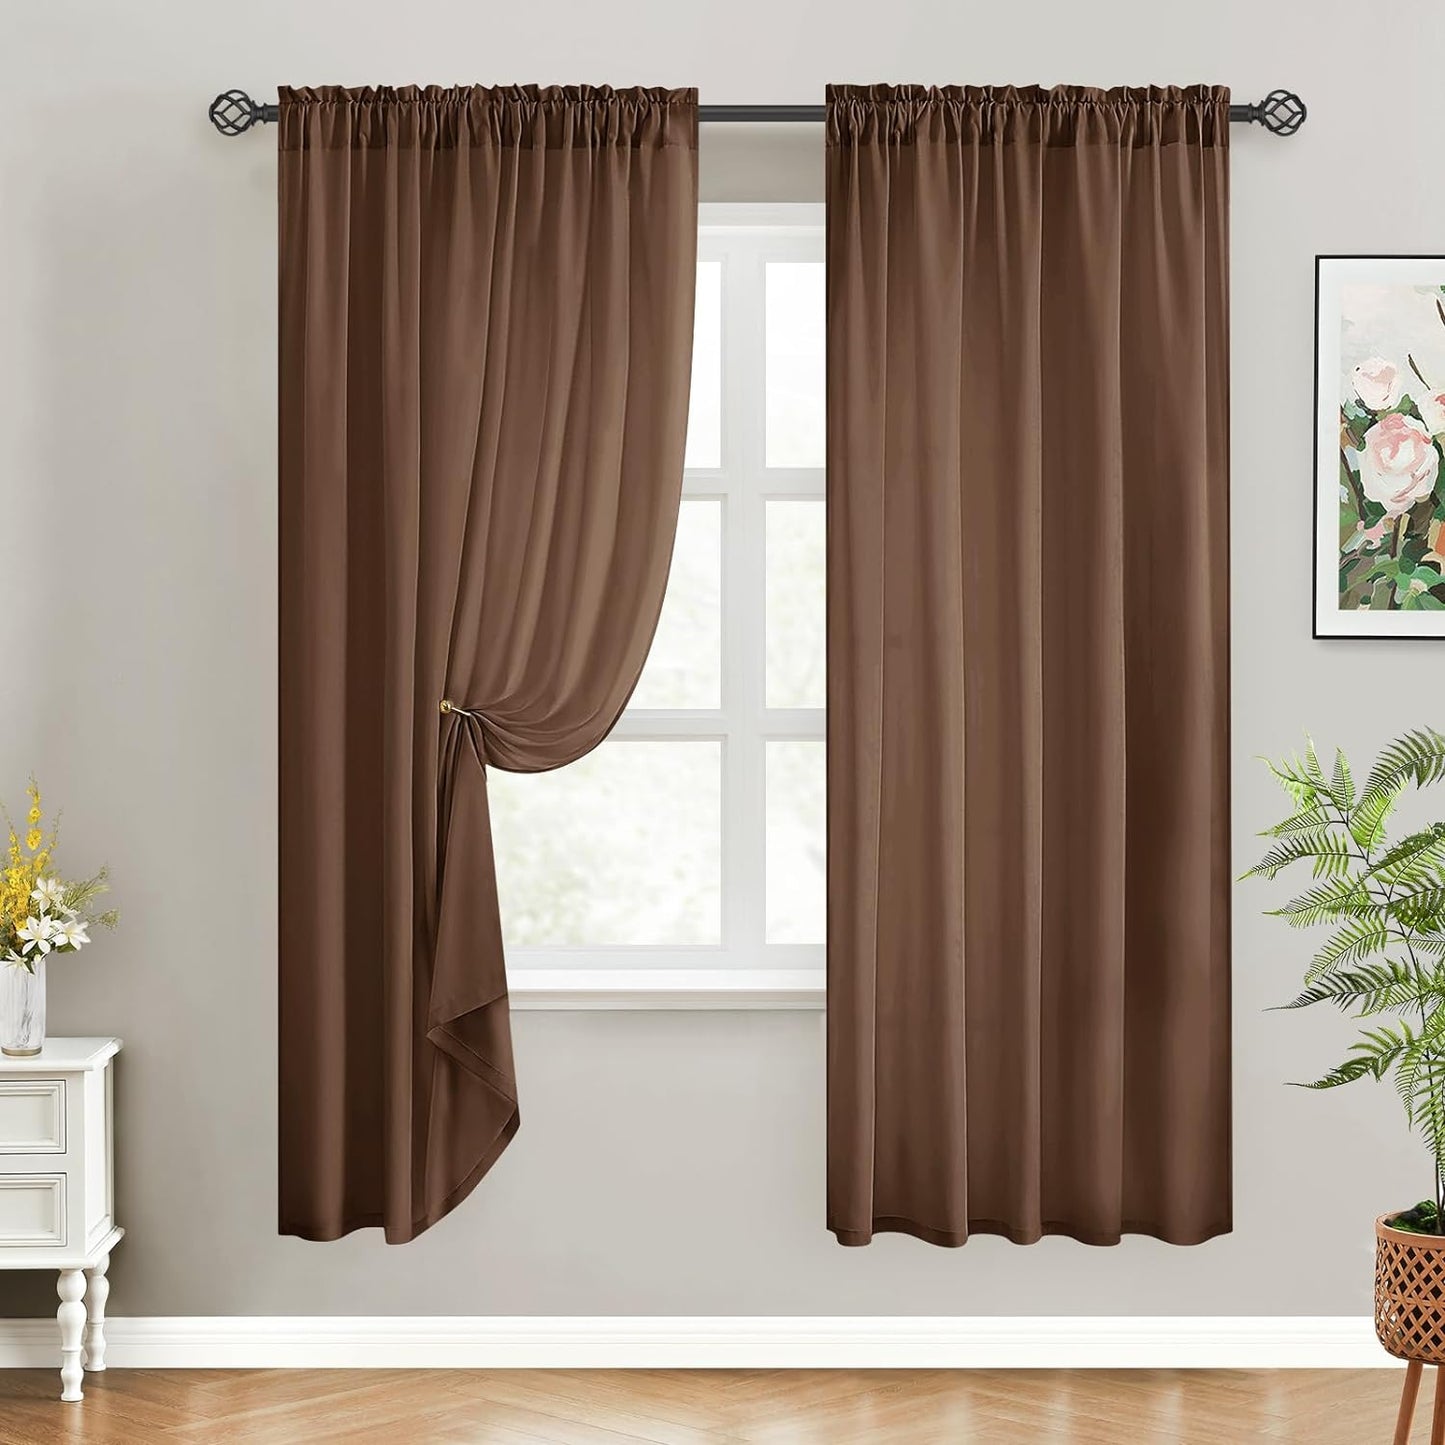 HOMEIDEAS Non-See-Through White Privacy Sheer Curtains 52 X 84 Inches Long 2 Panels Semi Sheer Curtains Light Filtering Window Curtains Drapes for Bedroom Living Room  HOMEIDEAS Brown W52" X L72" 